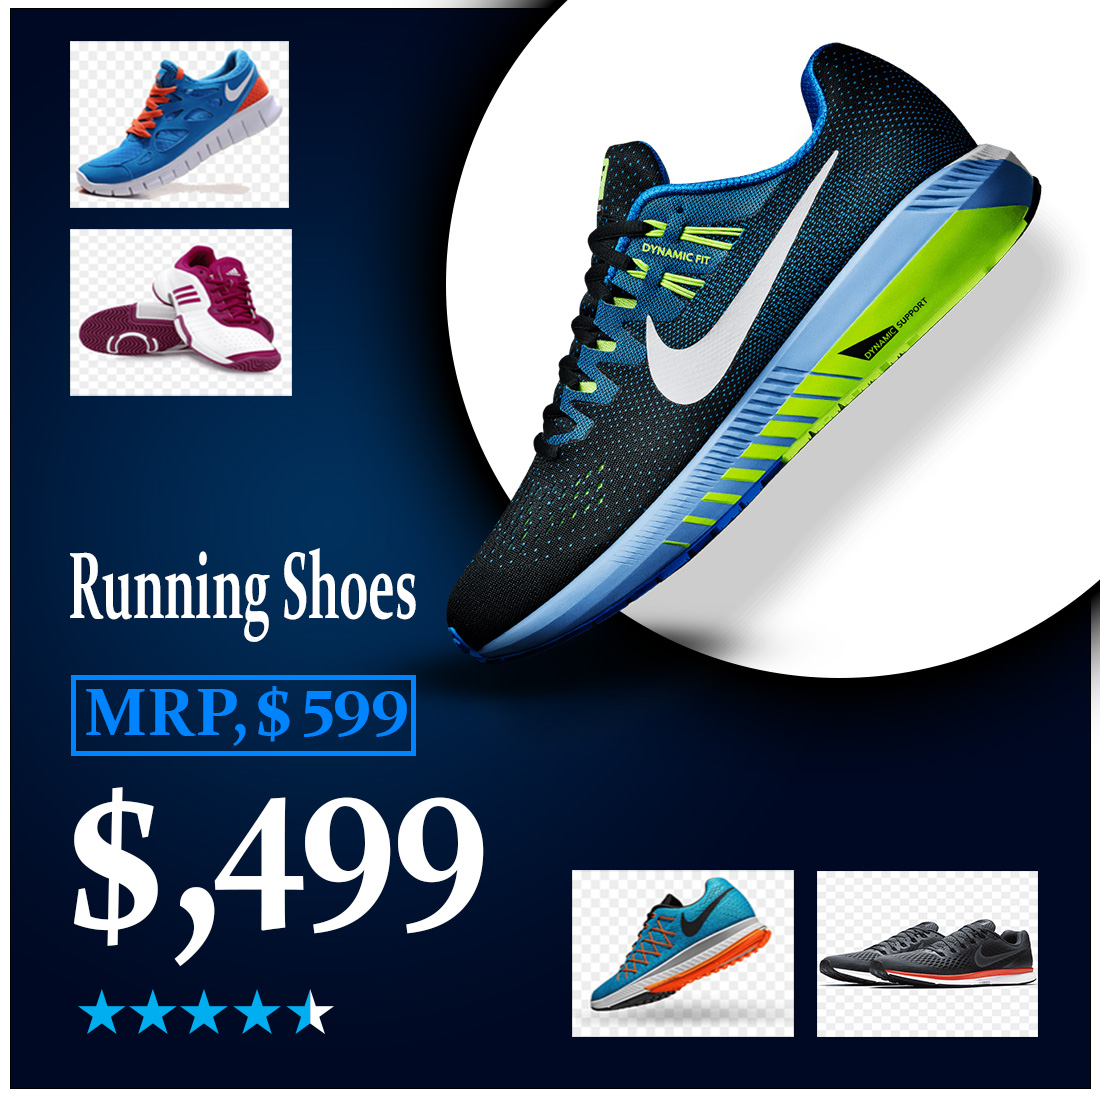 RUNNING SHOES SOCIAL MEDIA POSTER DESIGN preview image.